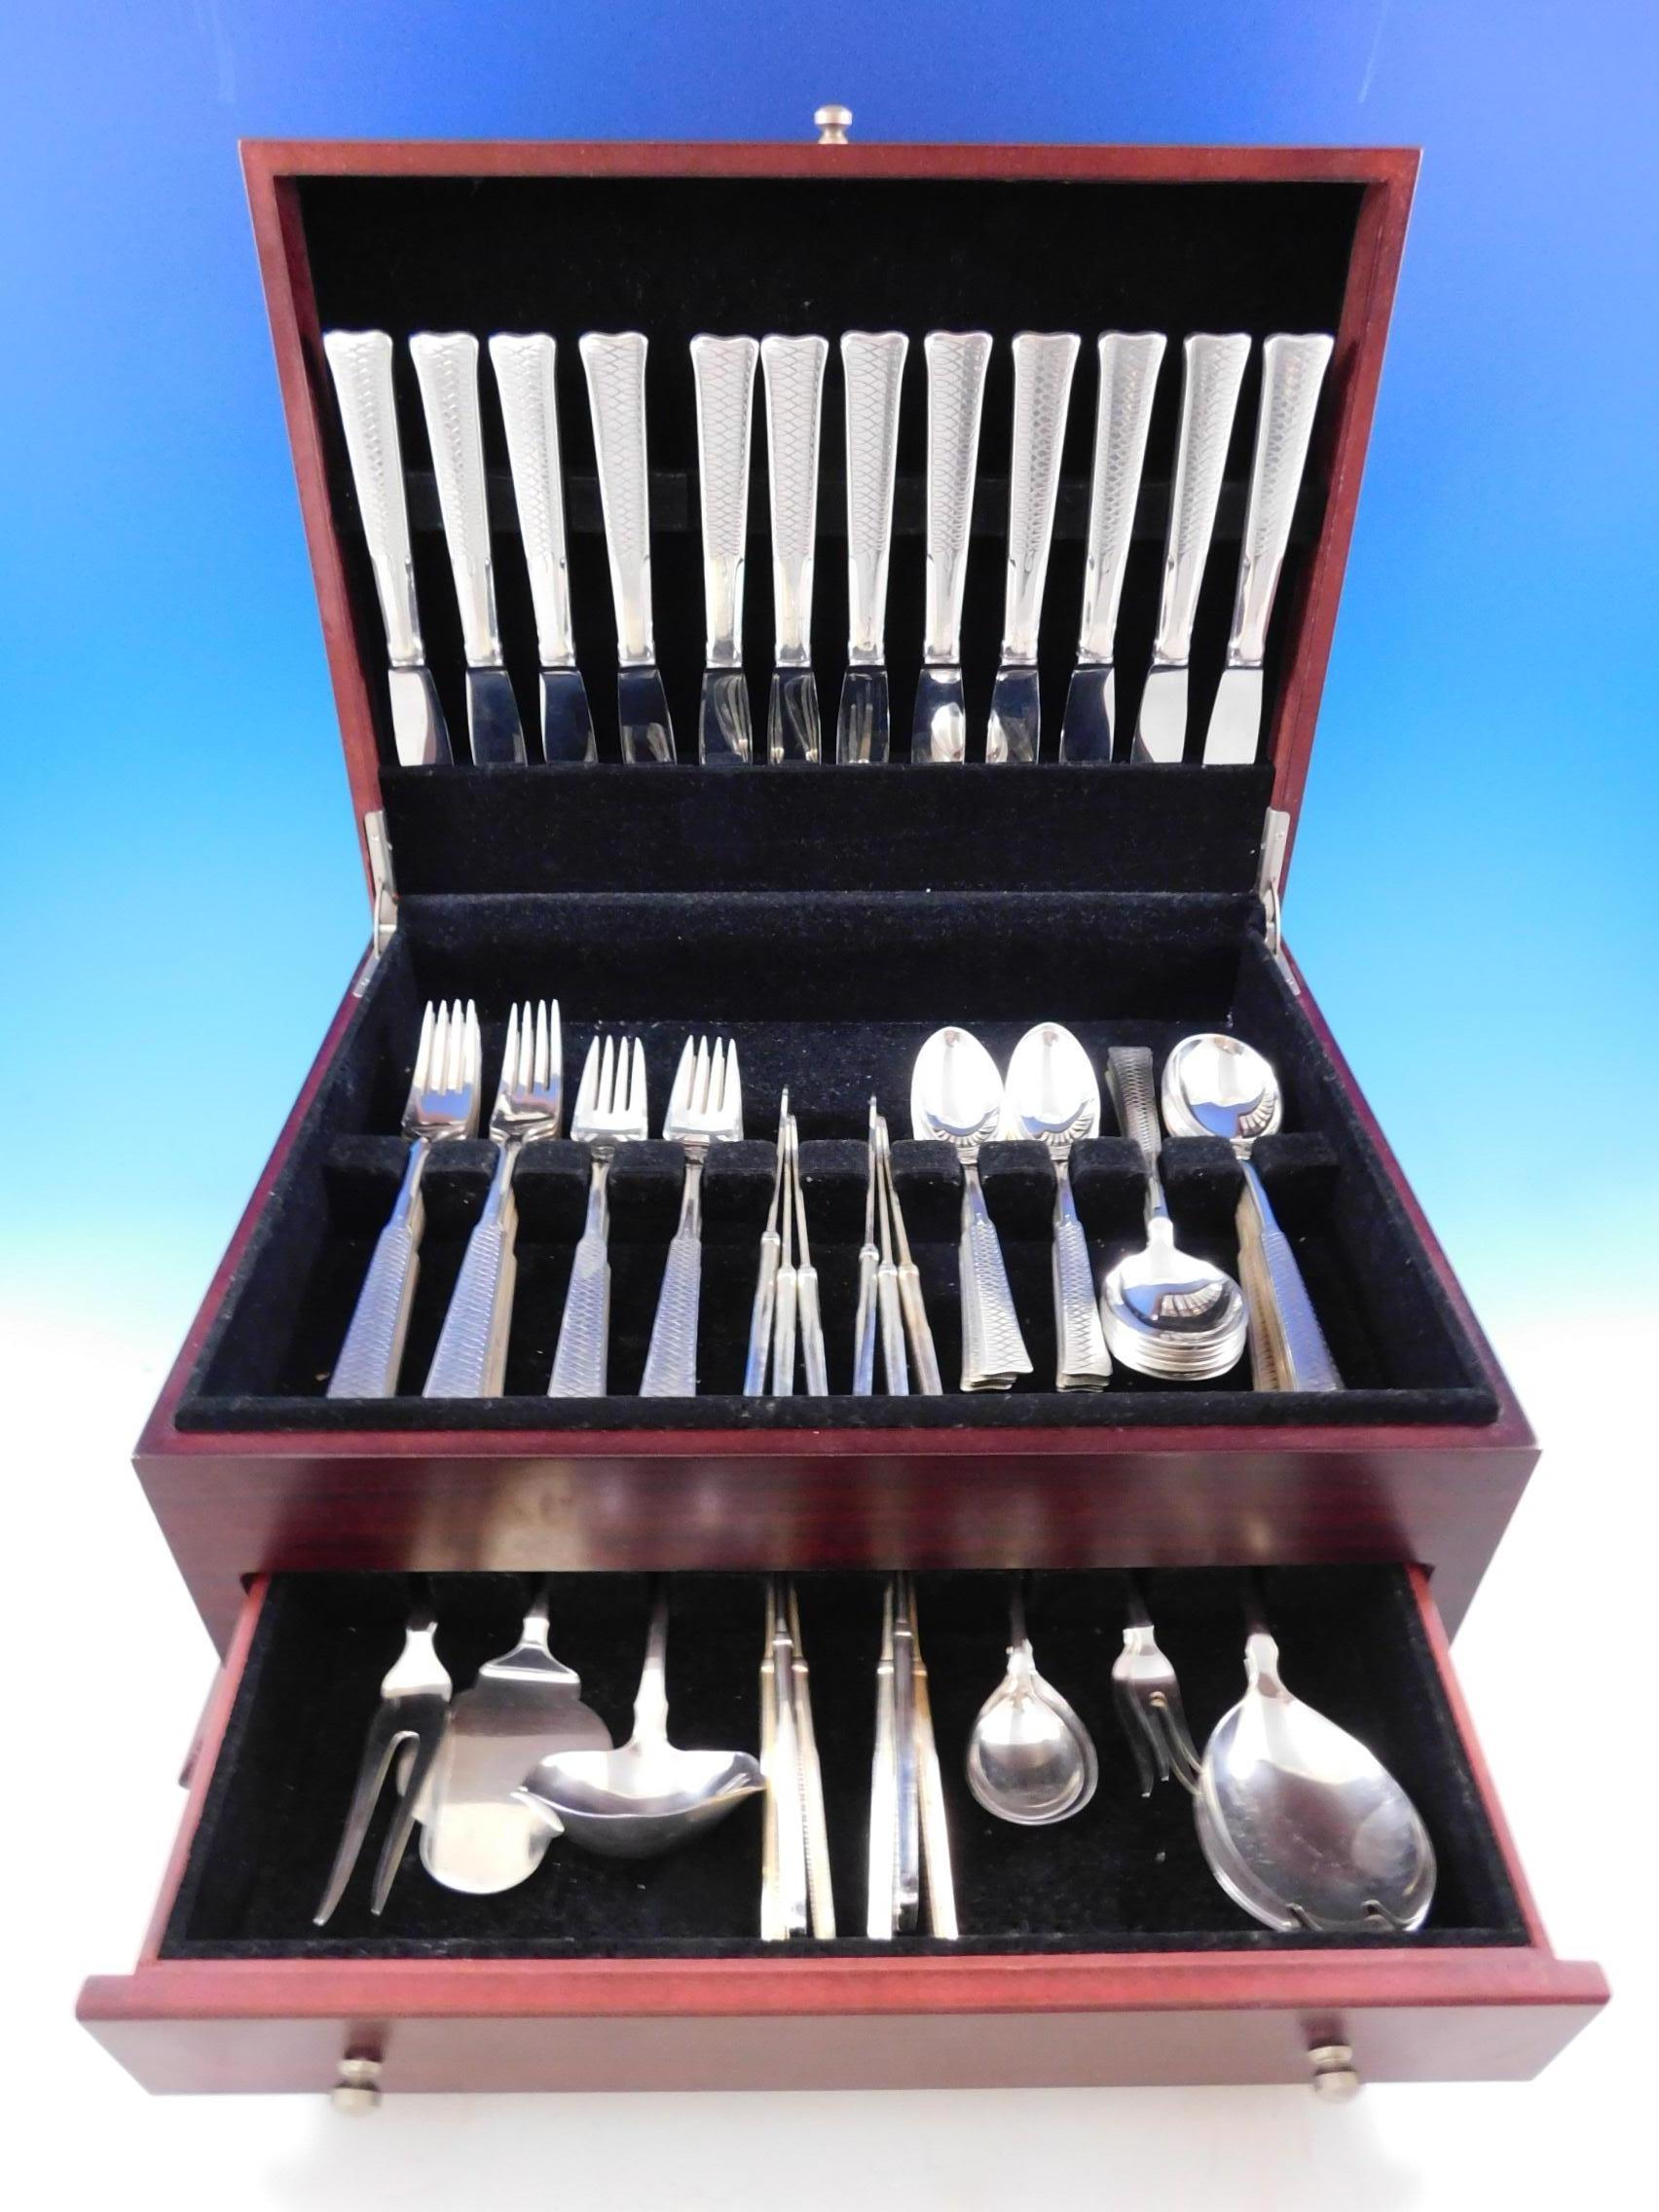 Eternity symbol by A. Dragsted Danish Mid-Century Modern sterling silver flatware set - 81 pieces. We have never seen this pattern before! The handle features a continuous eternity symbol, going down the handle. This scarce handmade set